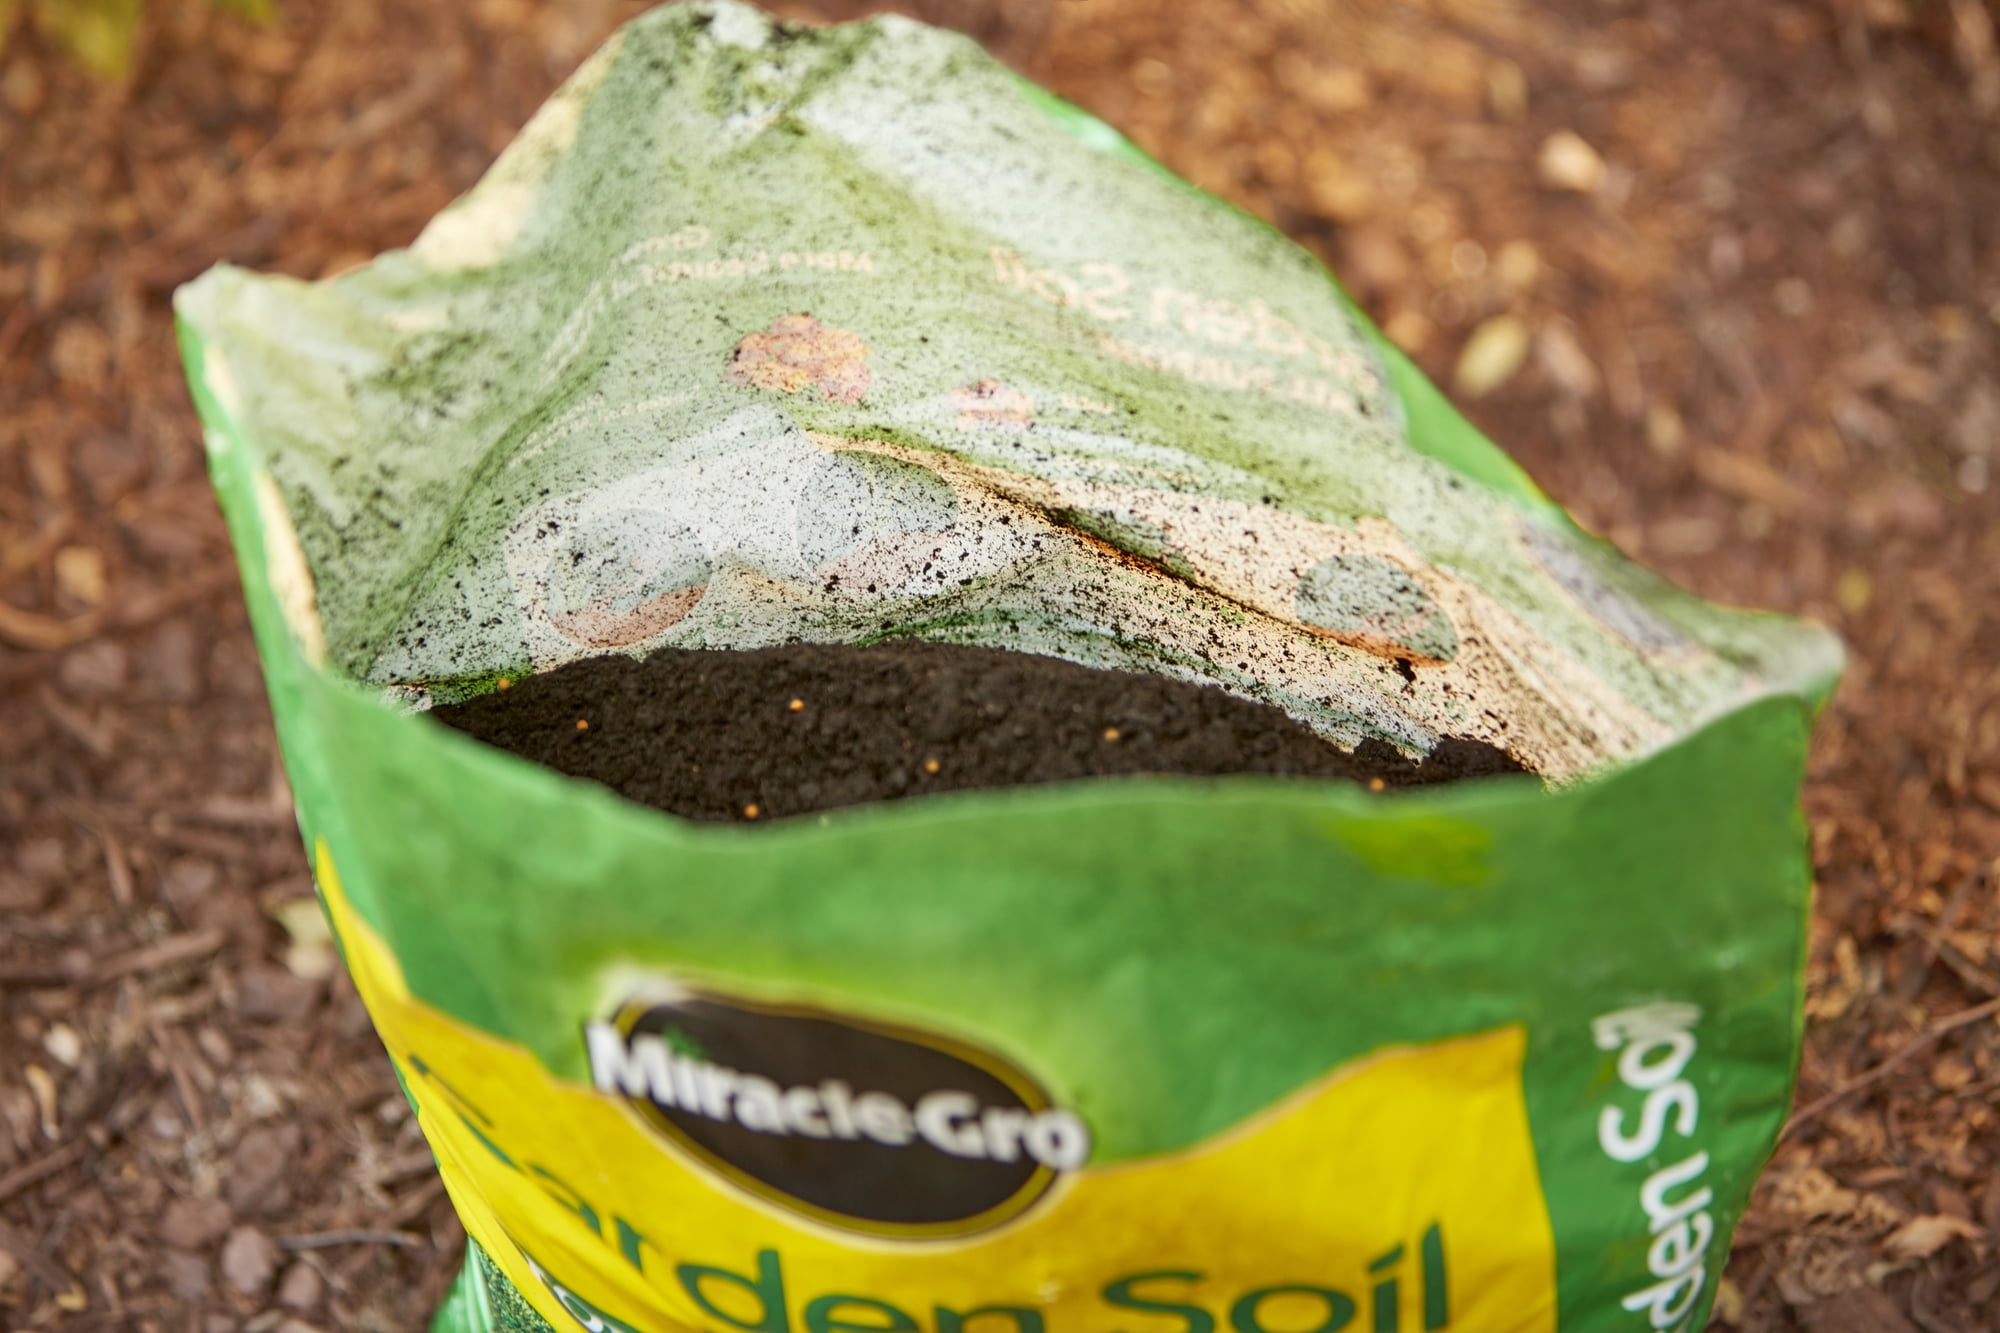 Miracle Gro Garden Soil All Purpose For In Ground Use 2 Cu Ft Feeds Up To 3 Months Walmart Com Walmart Com